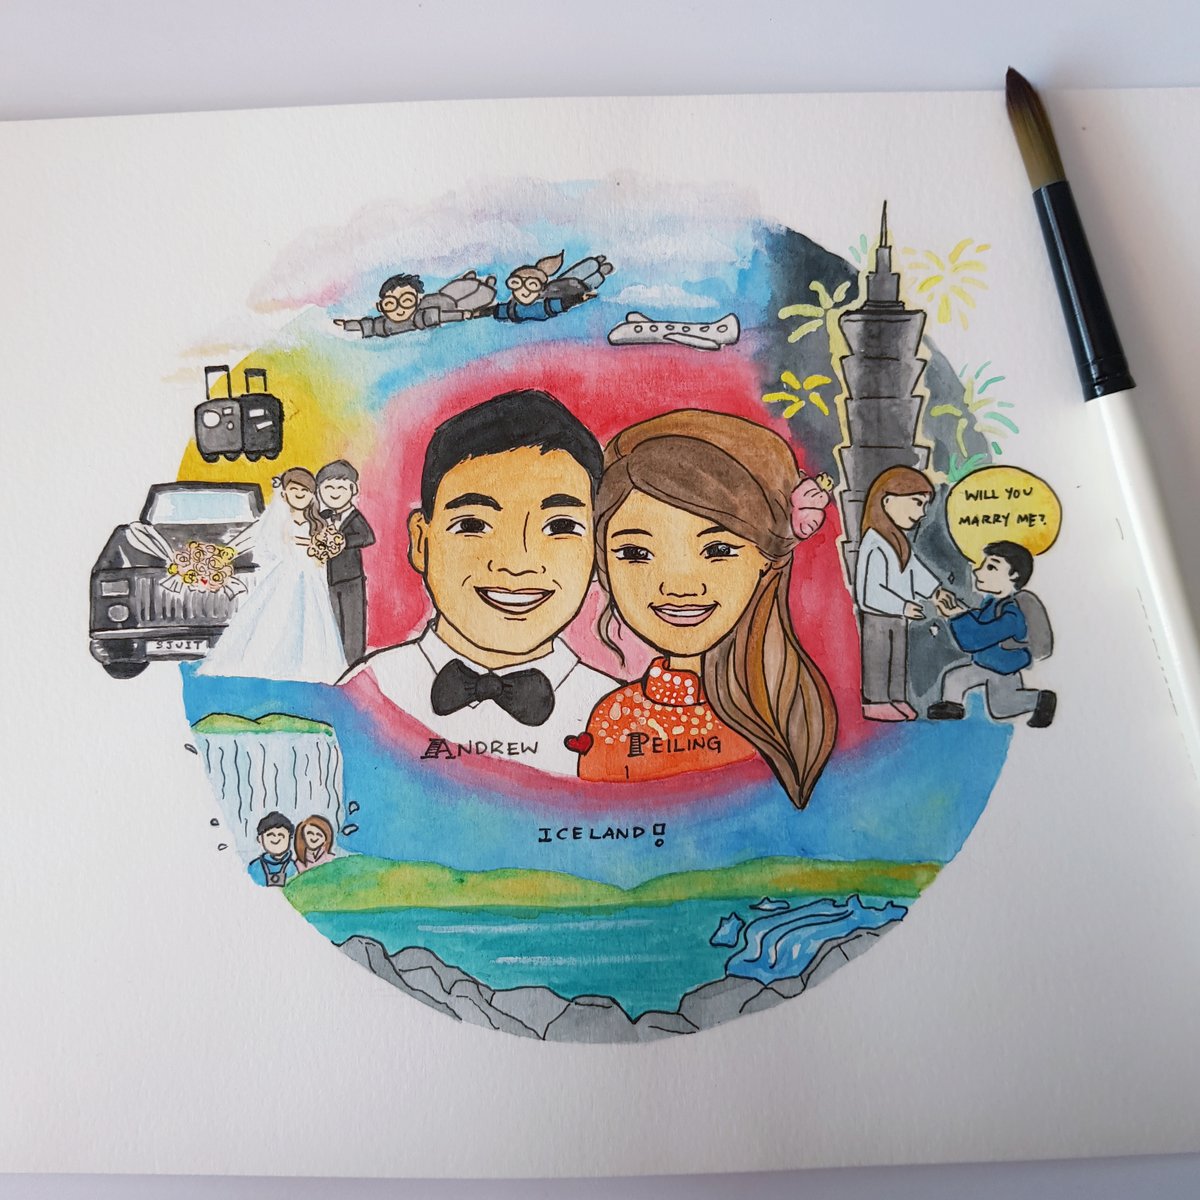 If we could choose to draw the things that remind us of our love, what would they be? Commissioned illustration for a lovely couple!

#onglaiart #ongweiting #watercolour #gouache #weddingartwork #weddinganniversary #commissionedartwork #love #couple #illustration #sgartist